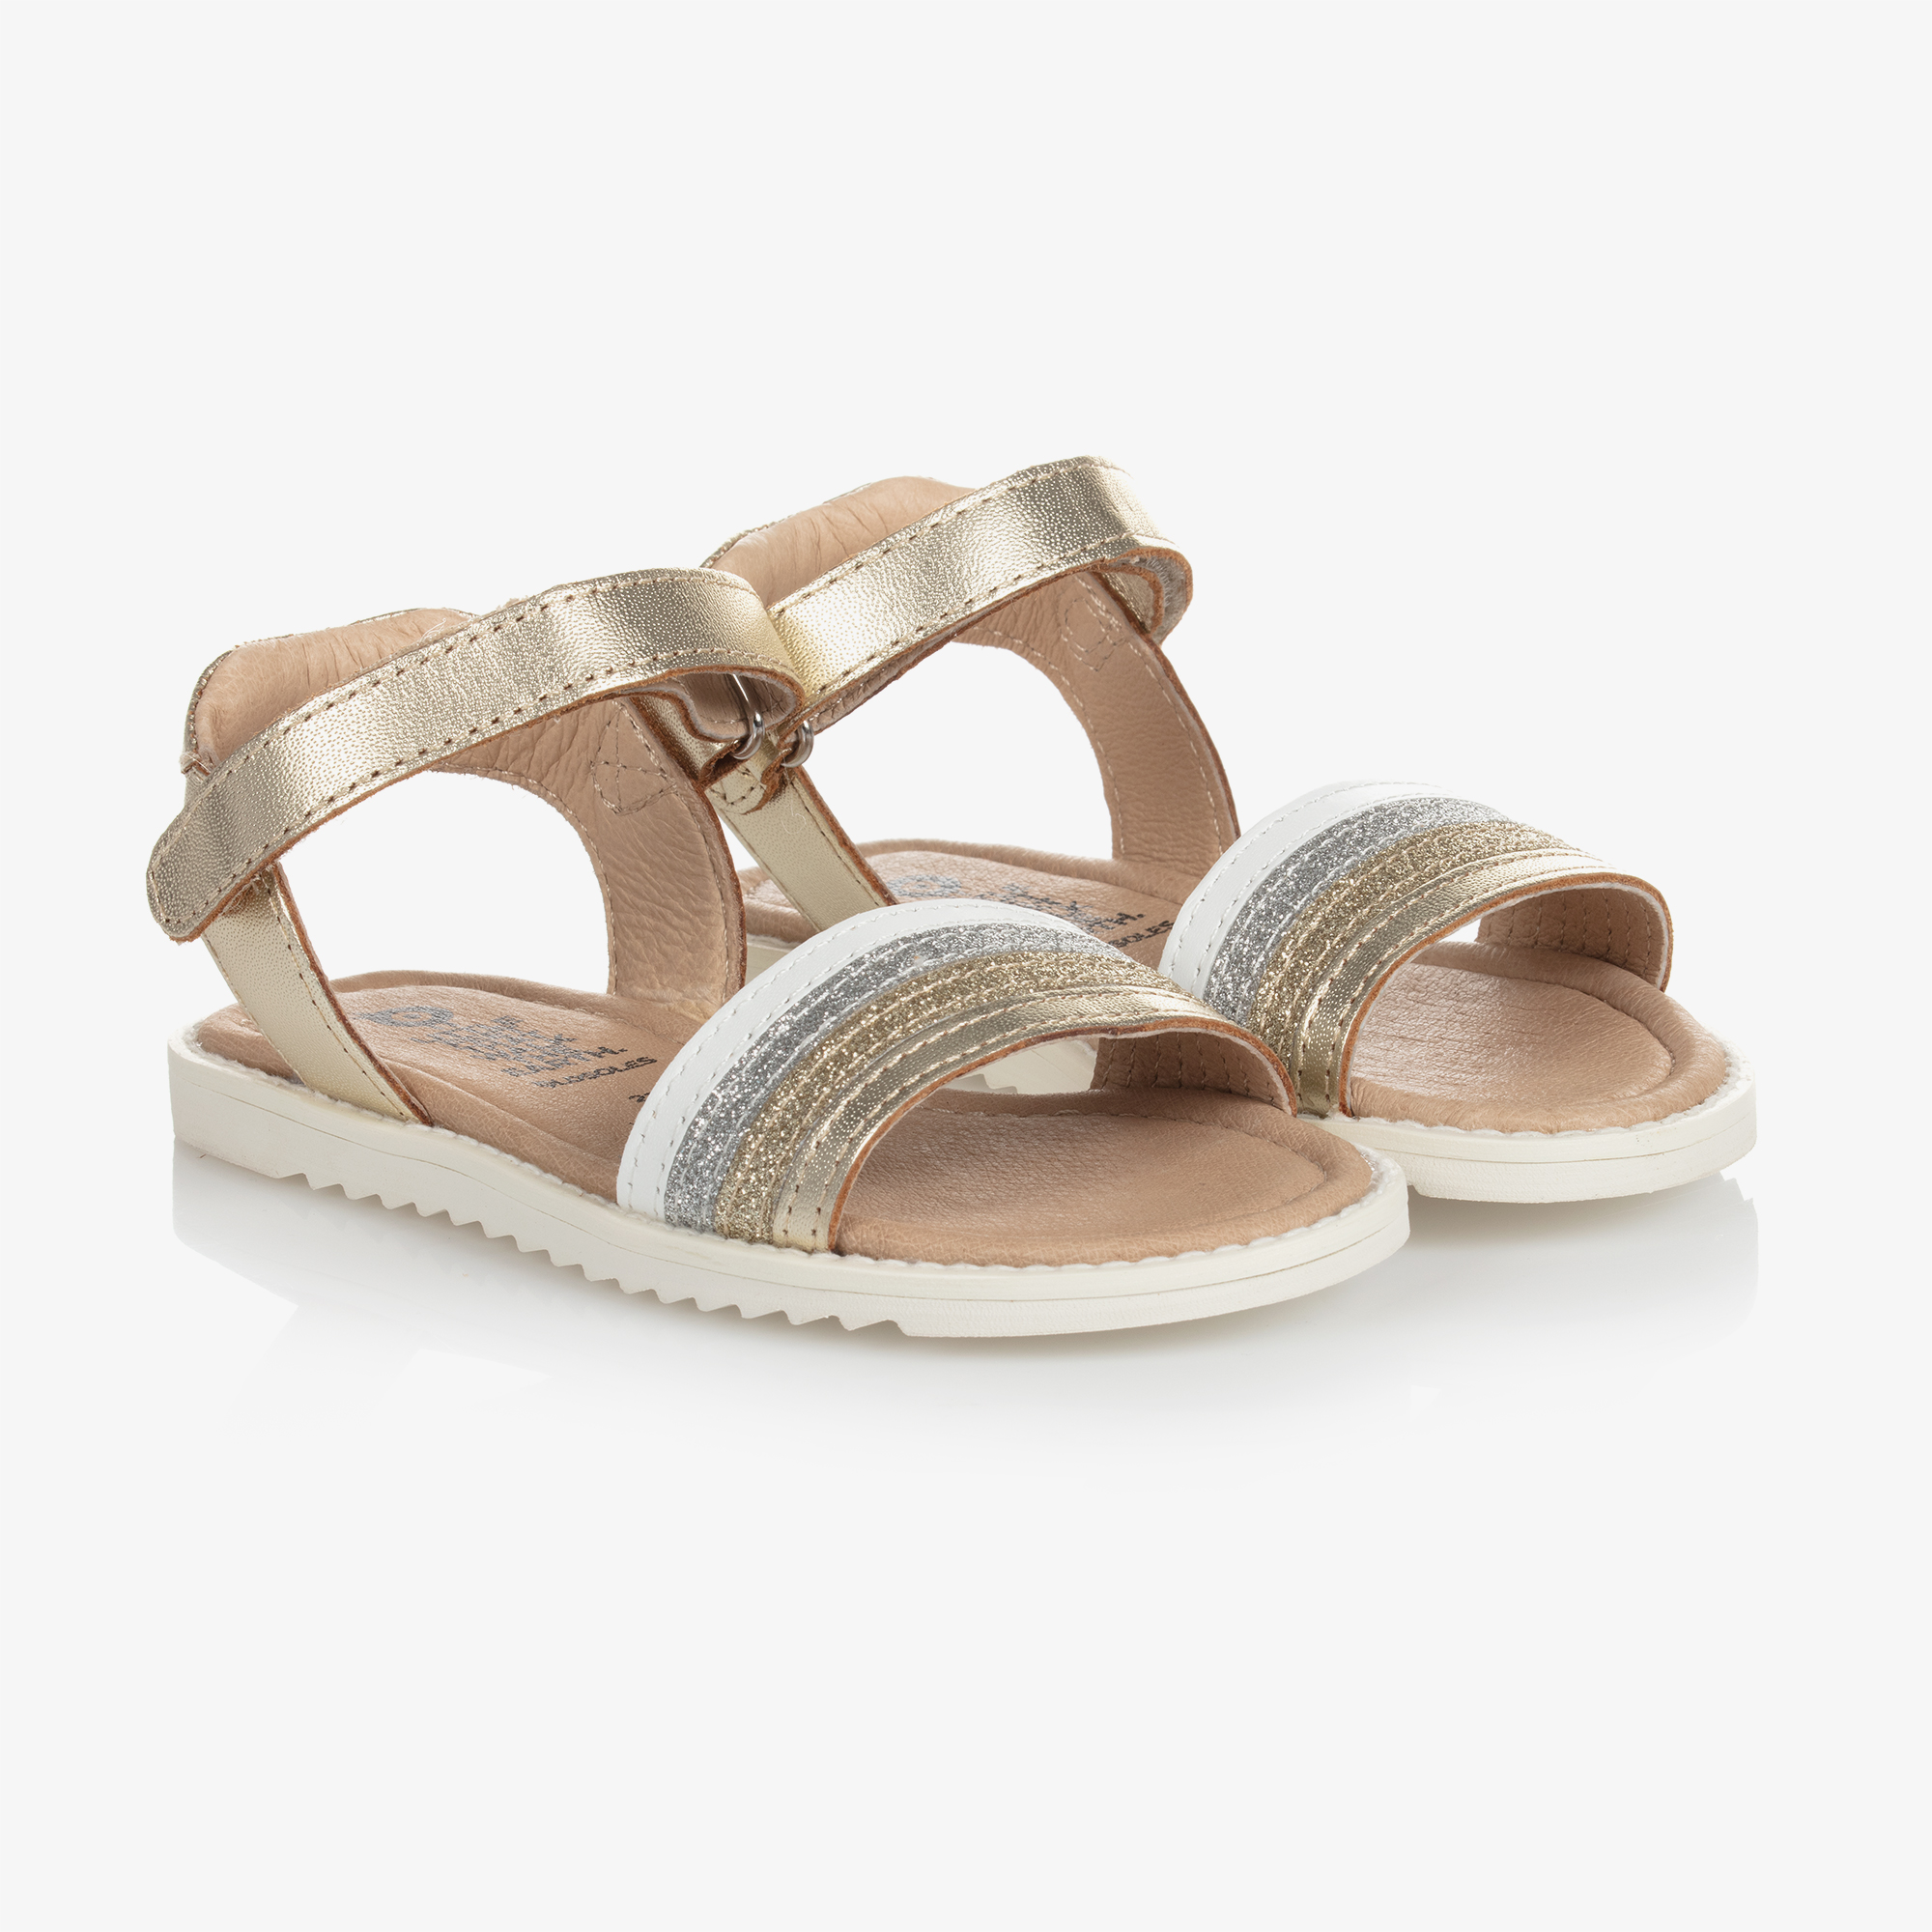 Old Soles - Teen Gold Leather Sandals | Childrensalon